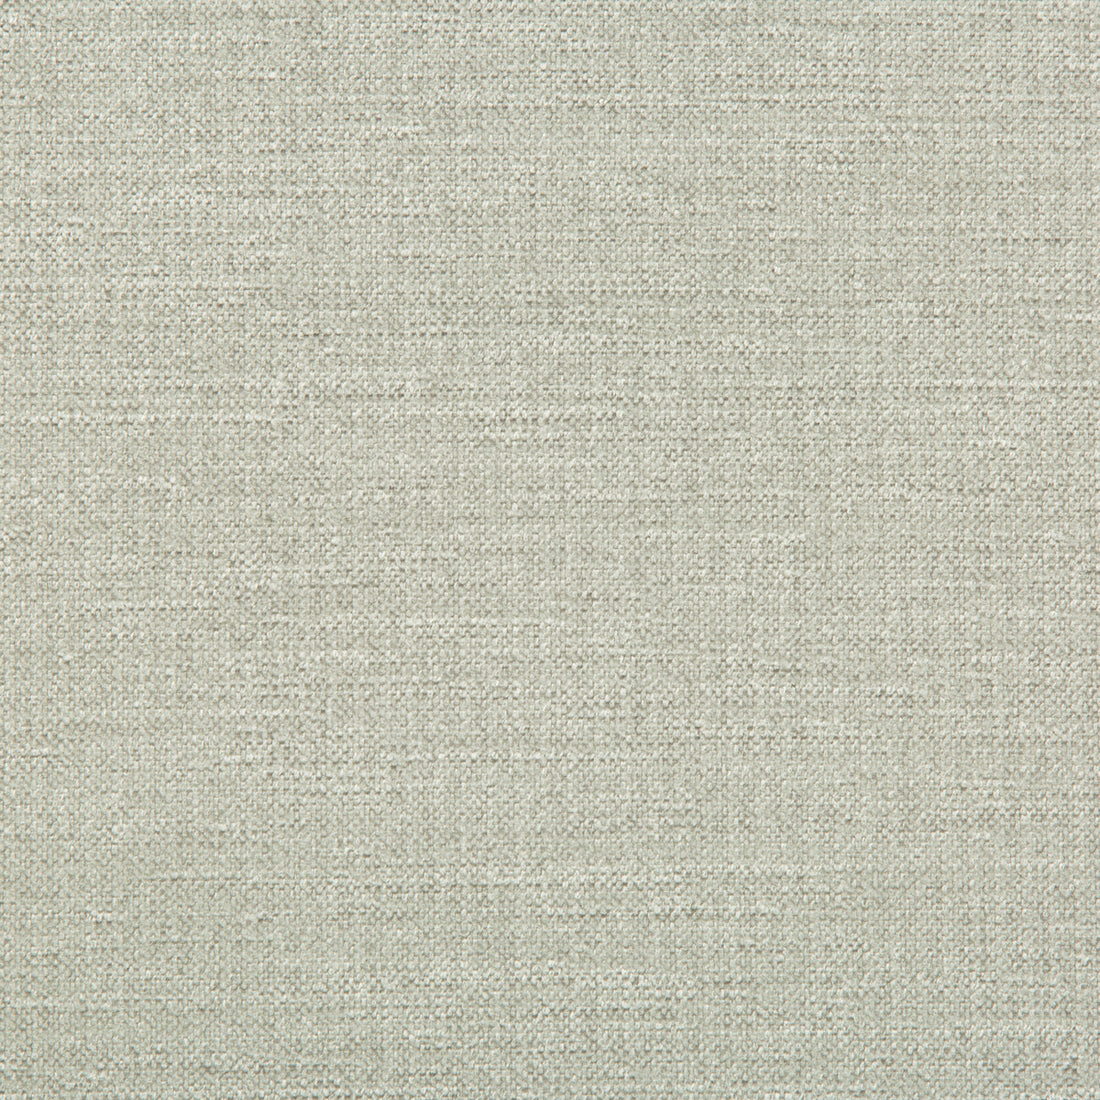 Kravet Smart fabric in 33831-1101 color - pattern 33831.1101.0 - by Kravet Smart in the Performance Crypton Home collection